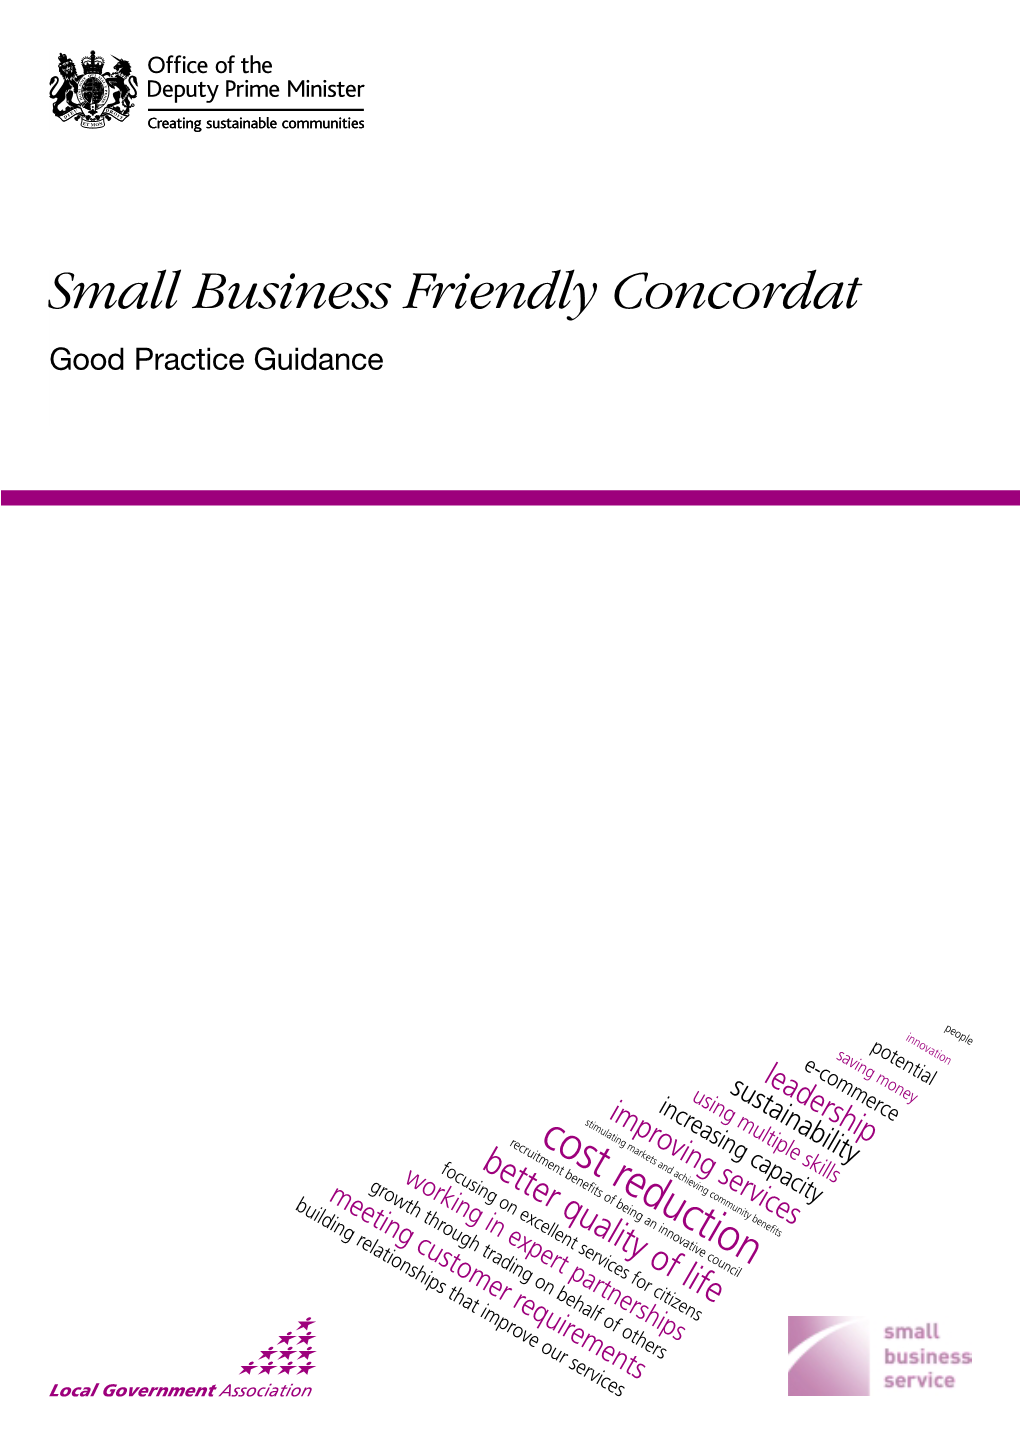 Small Business Friendly Concordat Good Practice Guidance